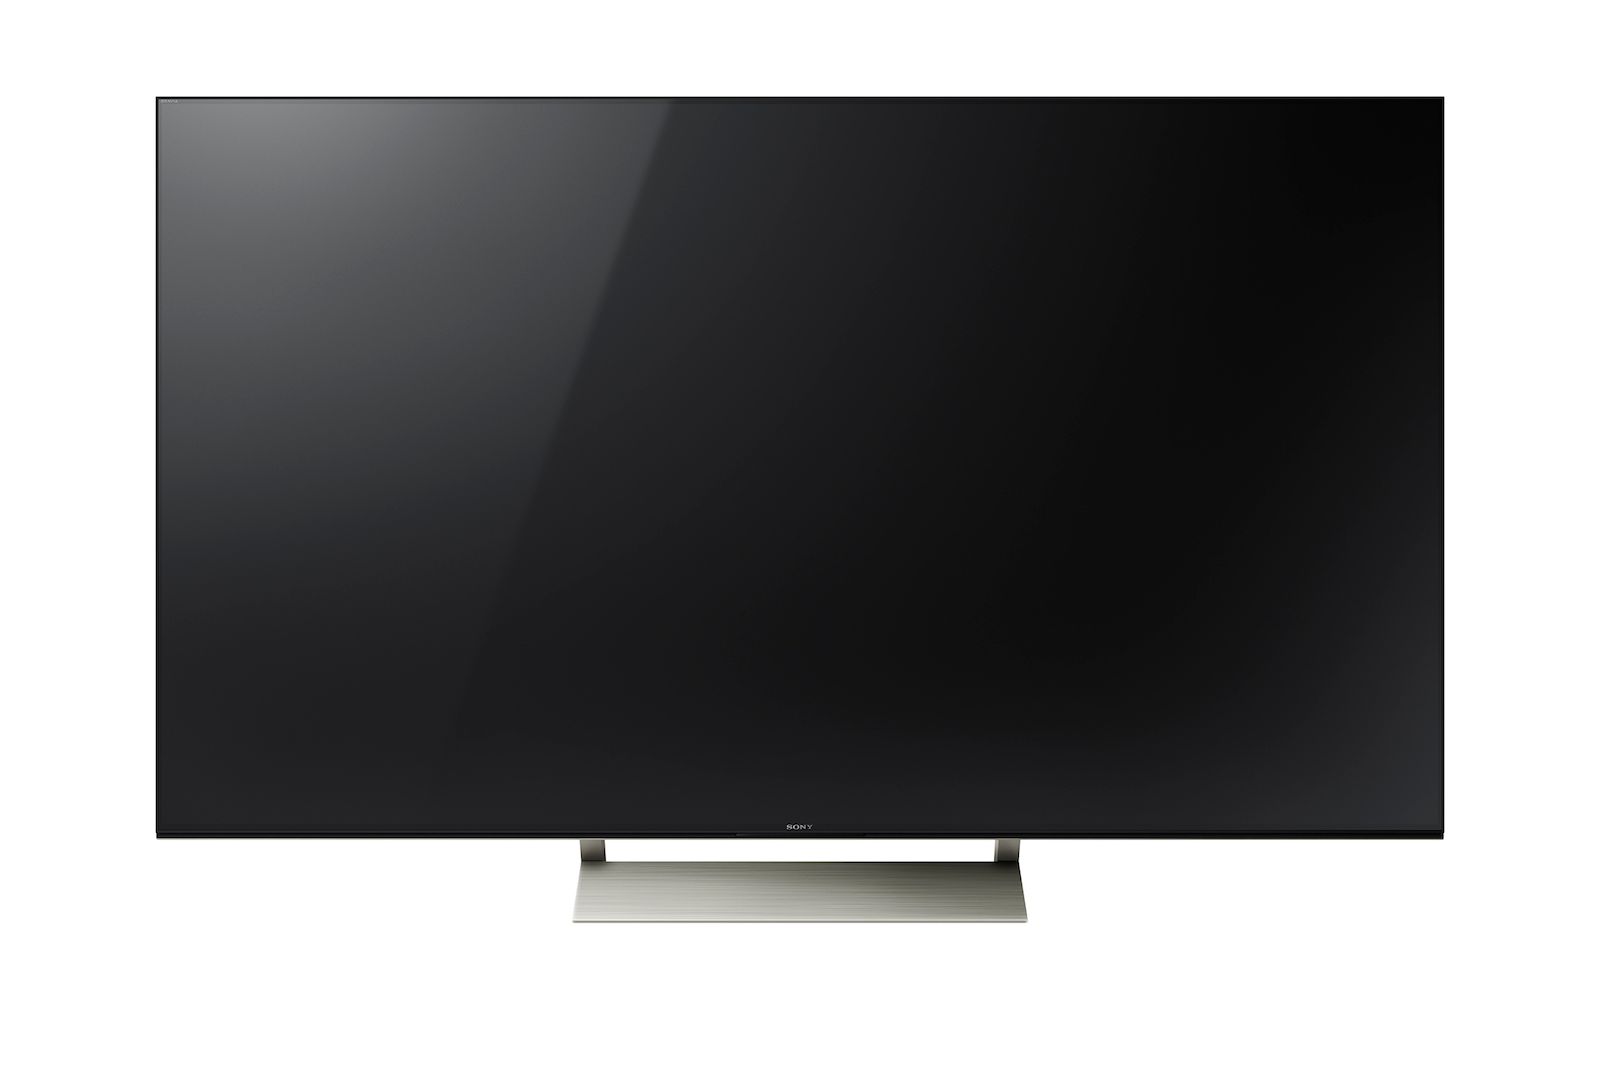 sony announces refreshed line up of 4k hdr tvs including dolby vision support image 1